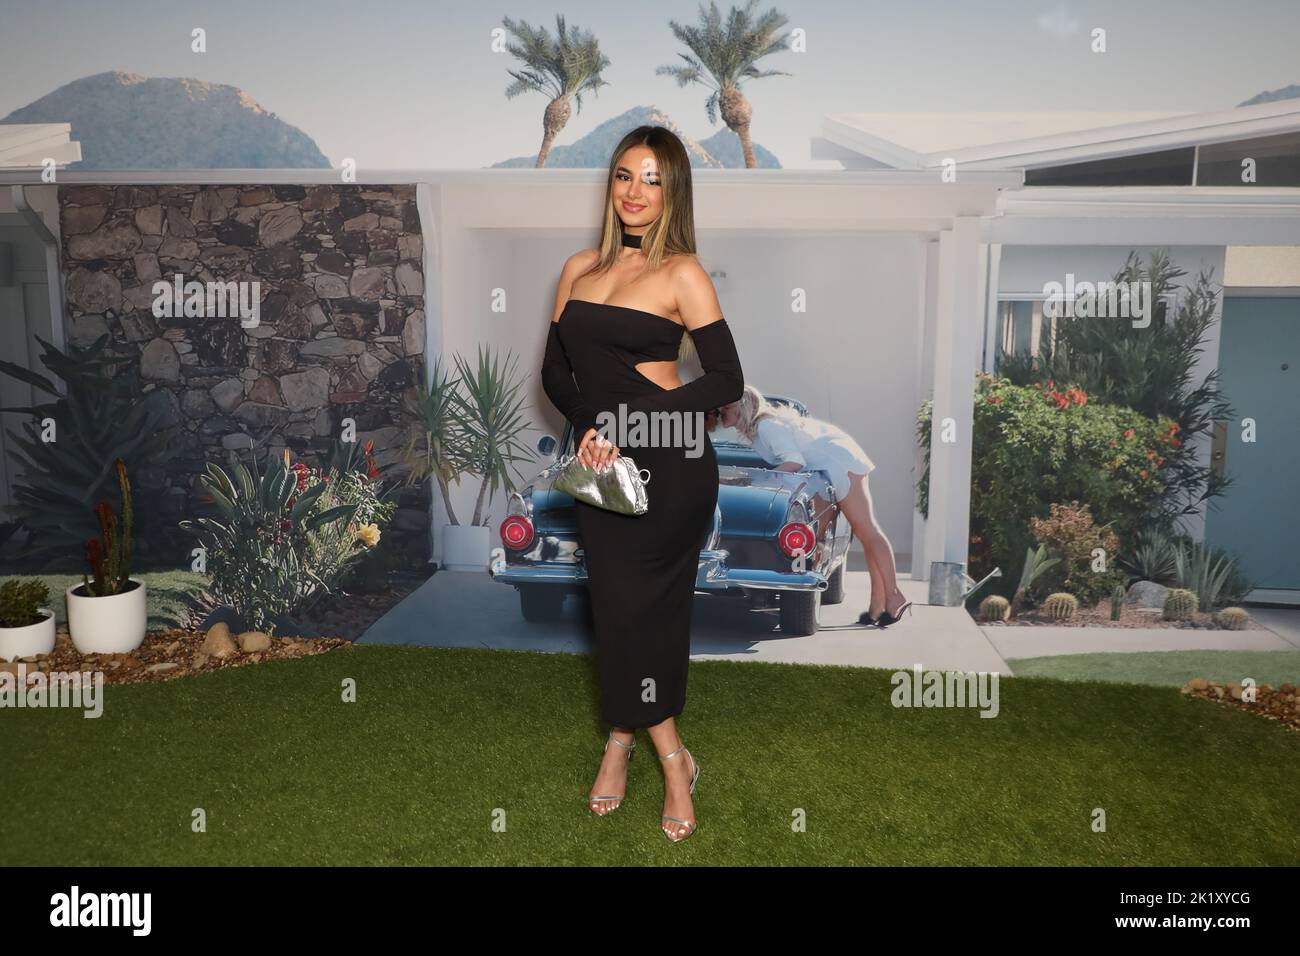 Sydney, Australia. 21st September 2022. Jessica Bader arrives on the red carpet for the Sydney Premiere of Don’t Worry Darling at Event Cinemas, George Street. Credit: Richard Milnes/Alamy Live News Stock Photo